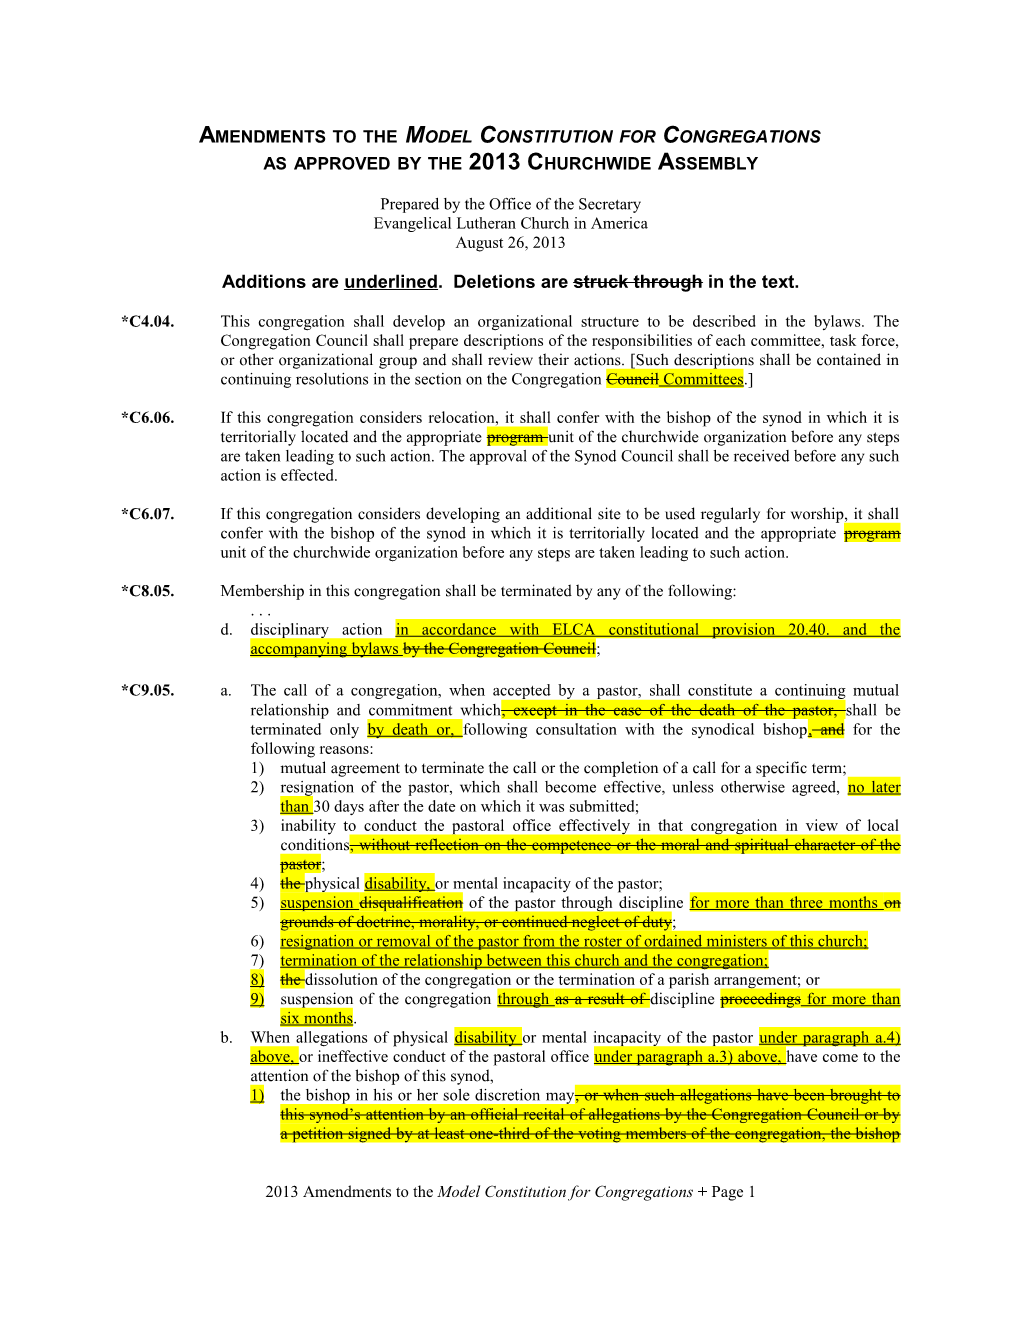 2013 Amendments to the Model Constitution